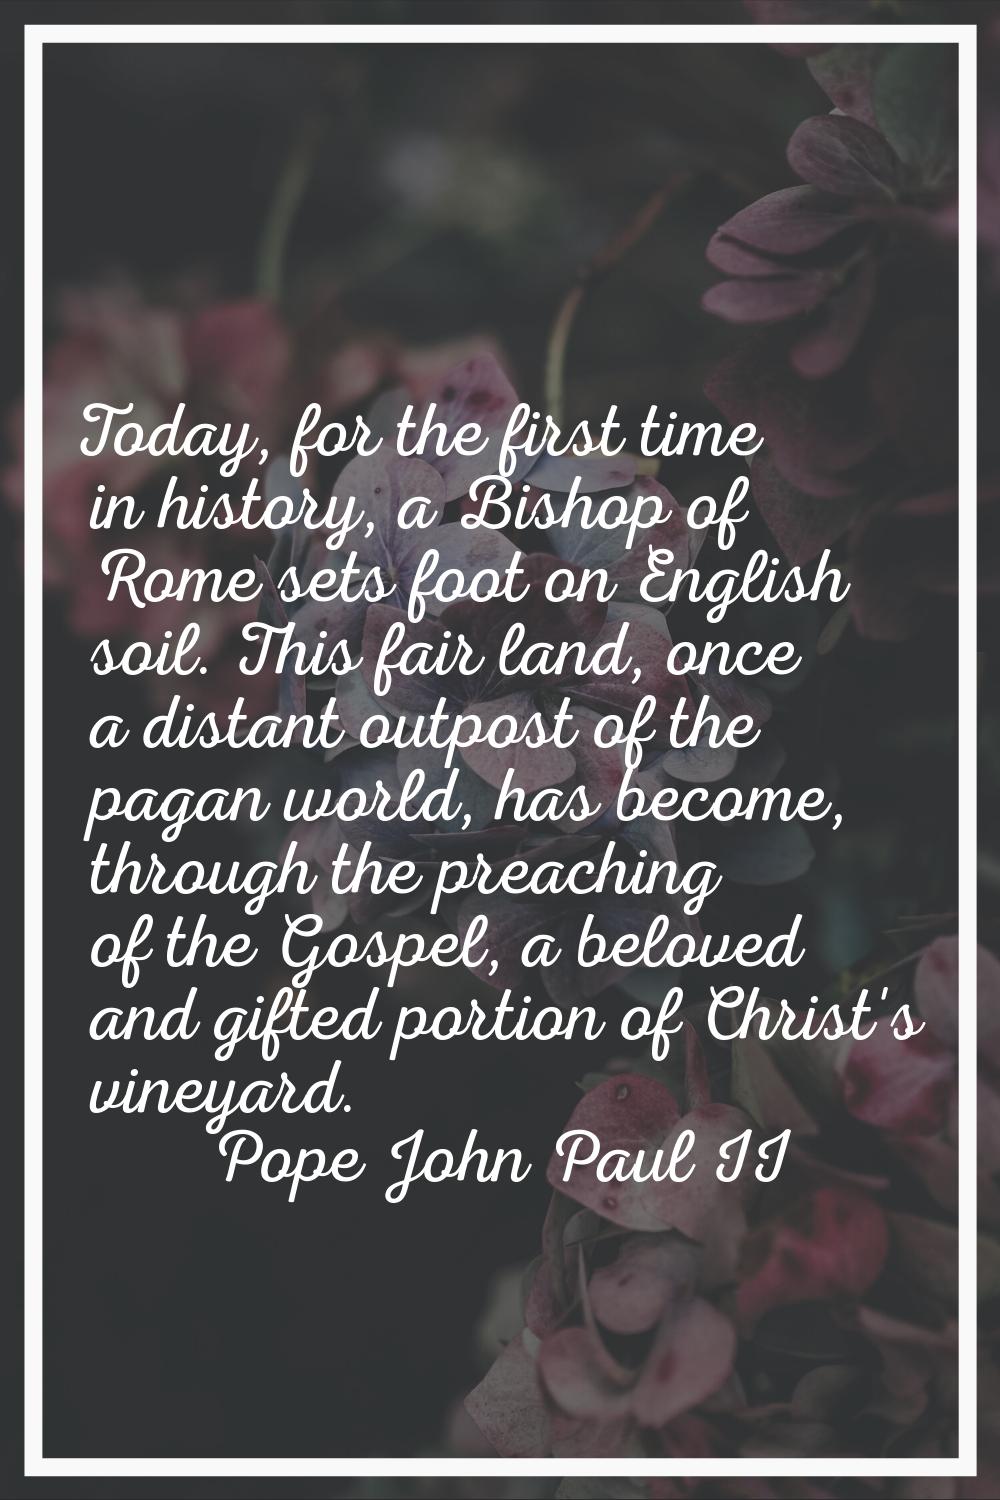 Today, for the first time in history, a Bishop of Rome sets foot on English soil. This fair land, o